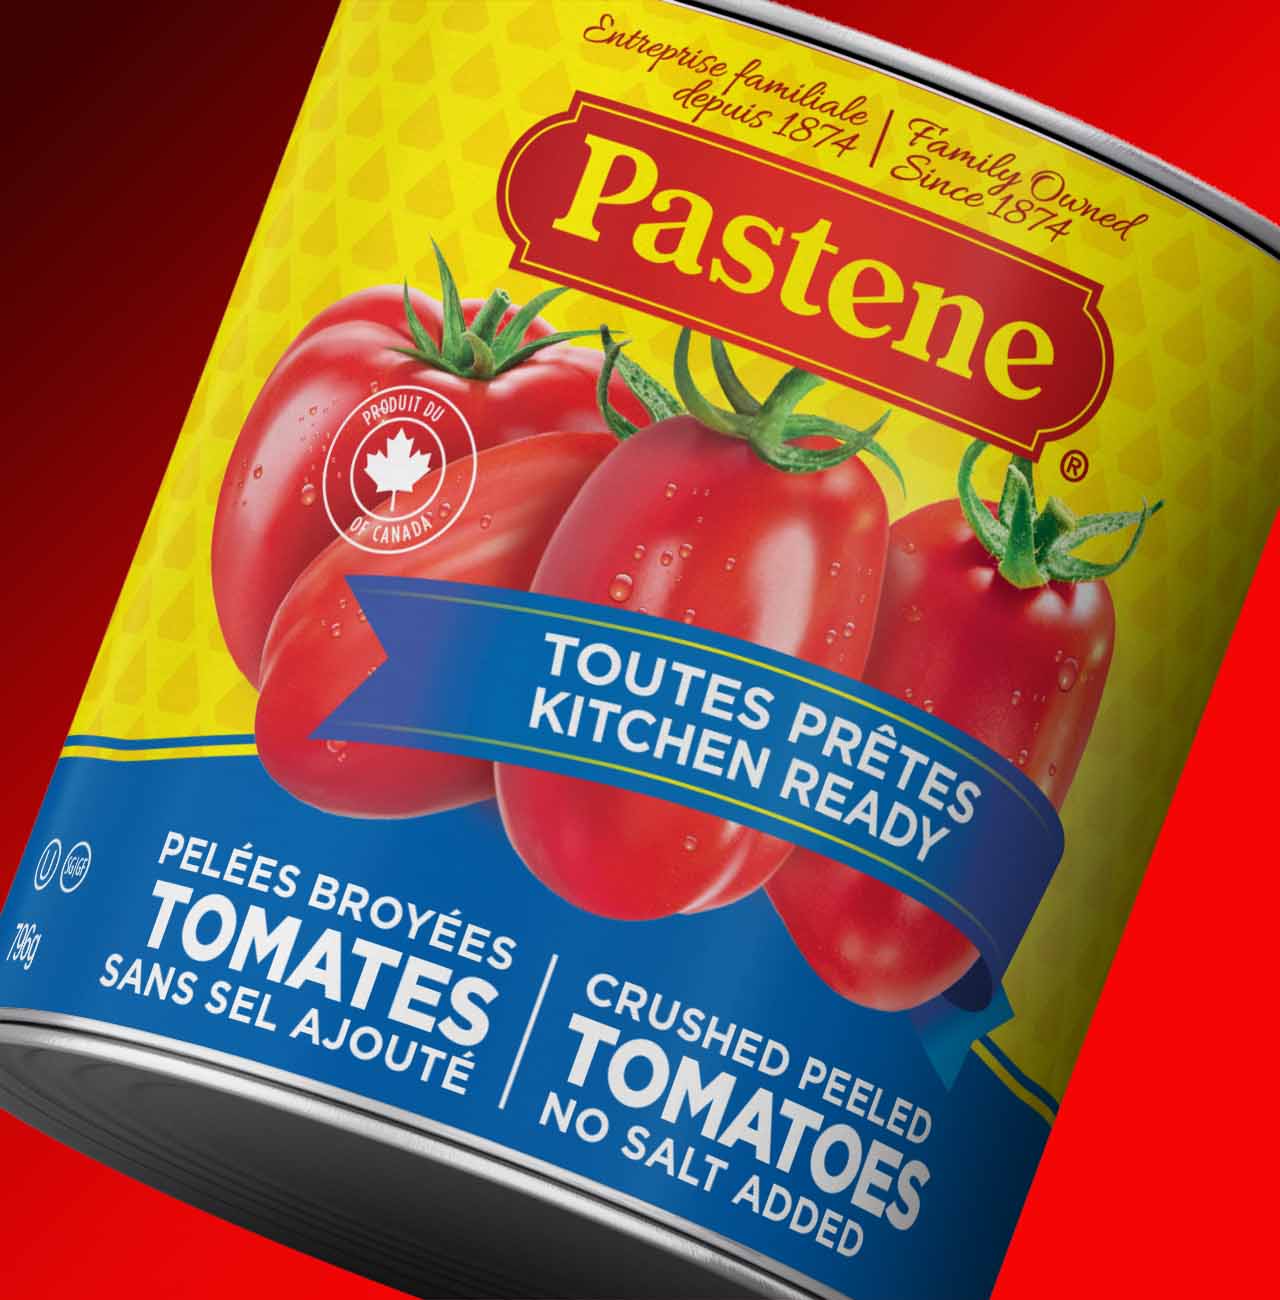 Pastene Kitchen Ready Tomatoes for Canada